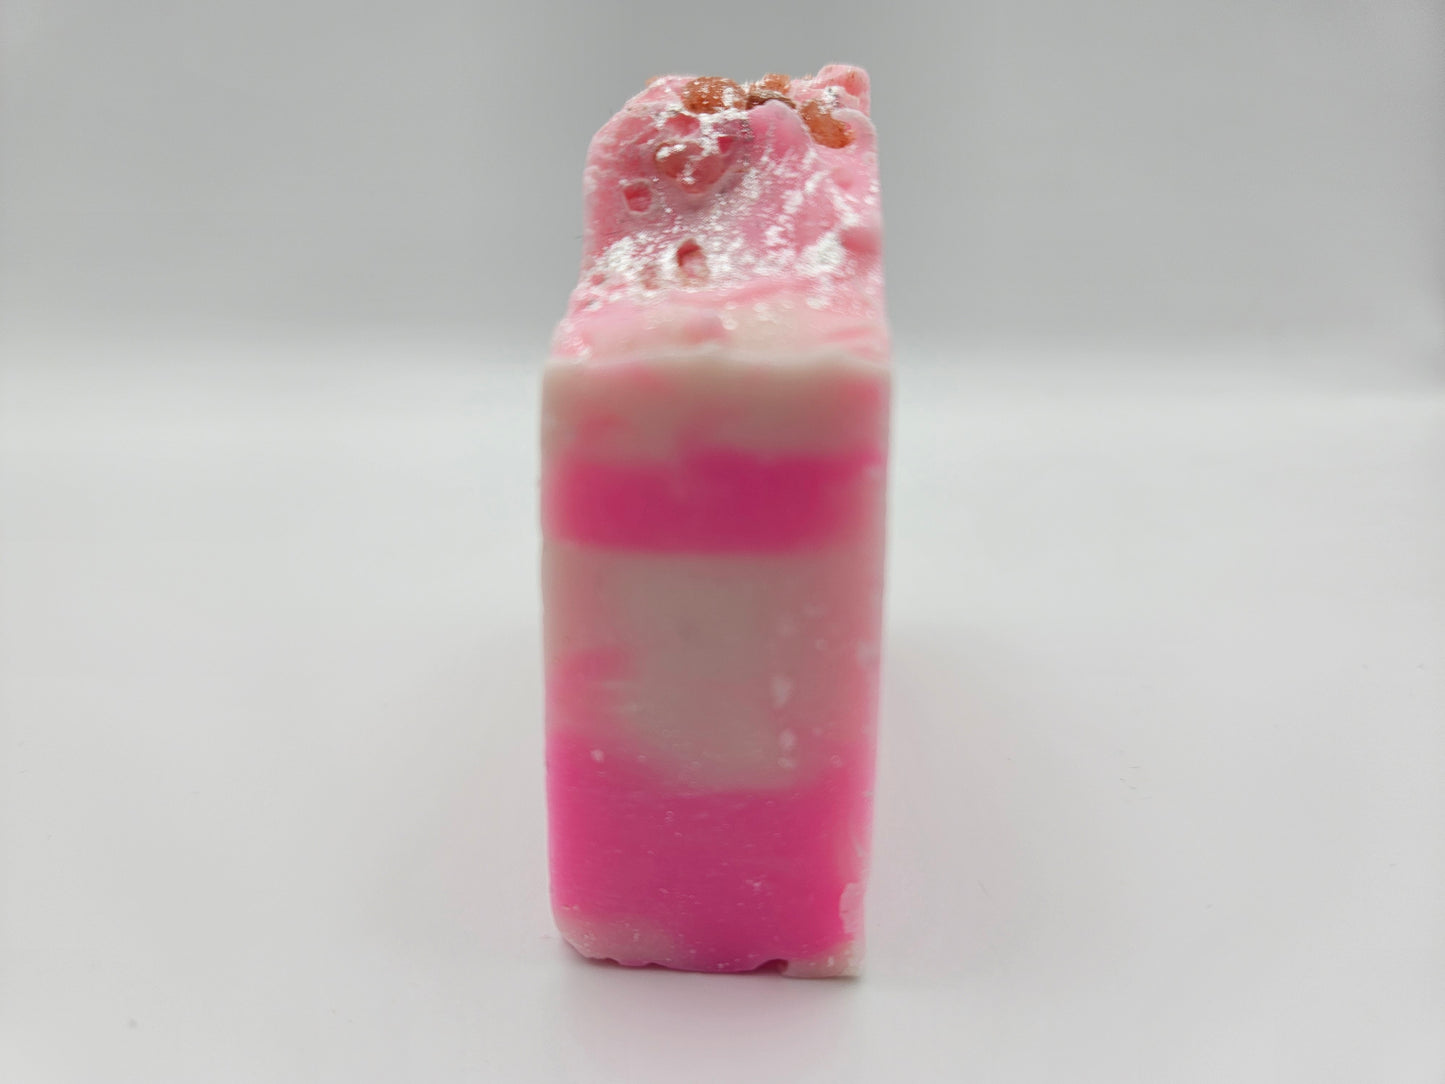 "Pink Opal" Cold Process Soap